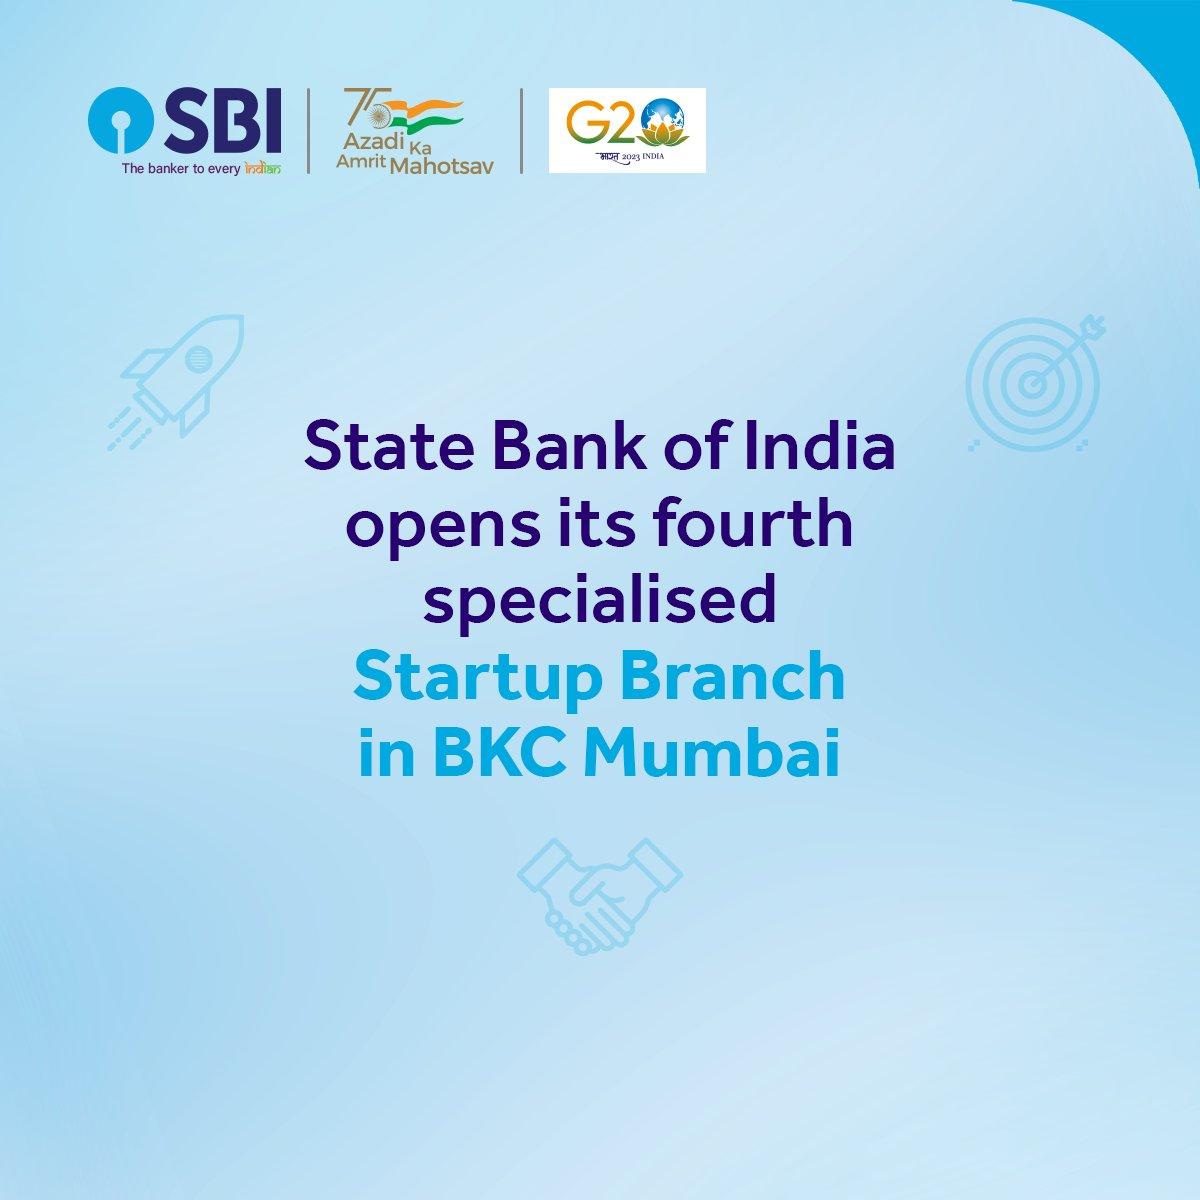 State Bank of India on Twitter: "Shri Dinesh Khara, Chairman, #SBI inaugurated Bank's 4th specialised branch for Startups in Mumbai's Bandra Kurla Complex. The Branch will provide all kinds of financial services